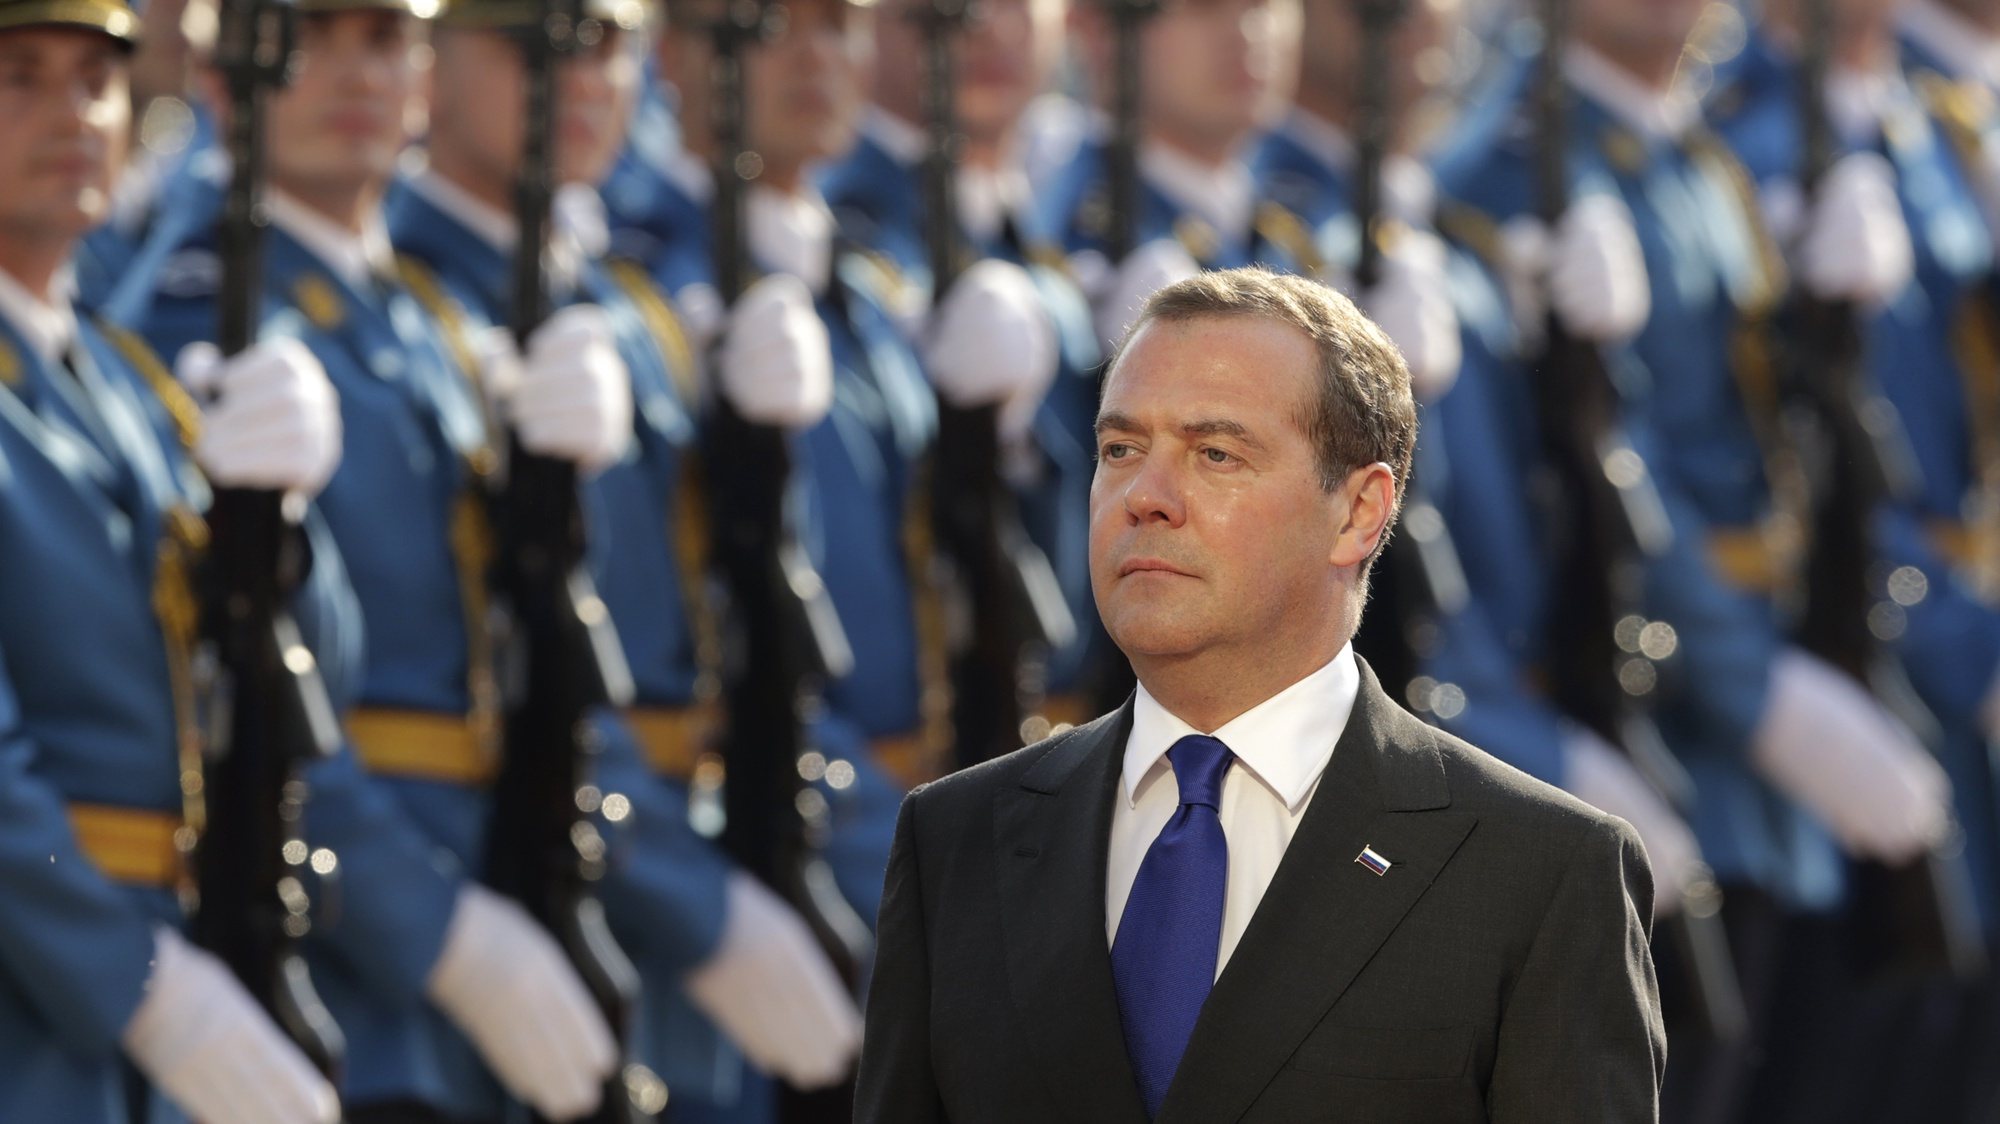 epa07933438 Russian Prime Minister Dimitri Medvedev inspects the guard of honour with Serbian Prime minister Ana Brnabic (not pictured) in Belgrade, Serbia, 19 October 2019. Medvedev is meeting Serbian top officials to discuss Russian-Serbian trade, economic, cultural and humanitarian relations.  EPA/ANDREJ CUKIC